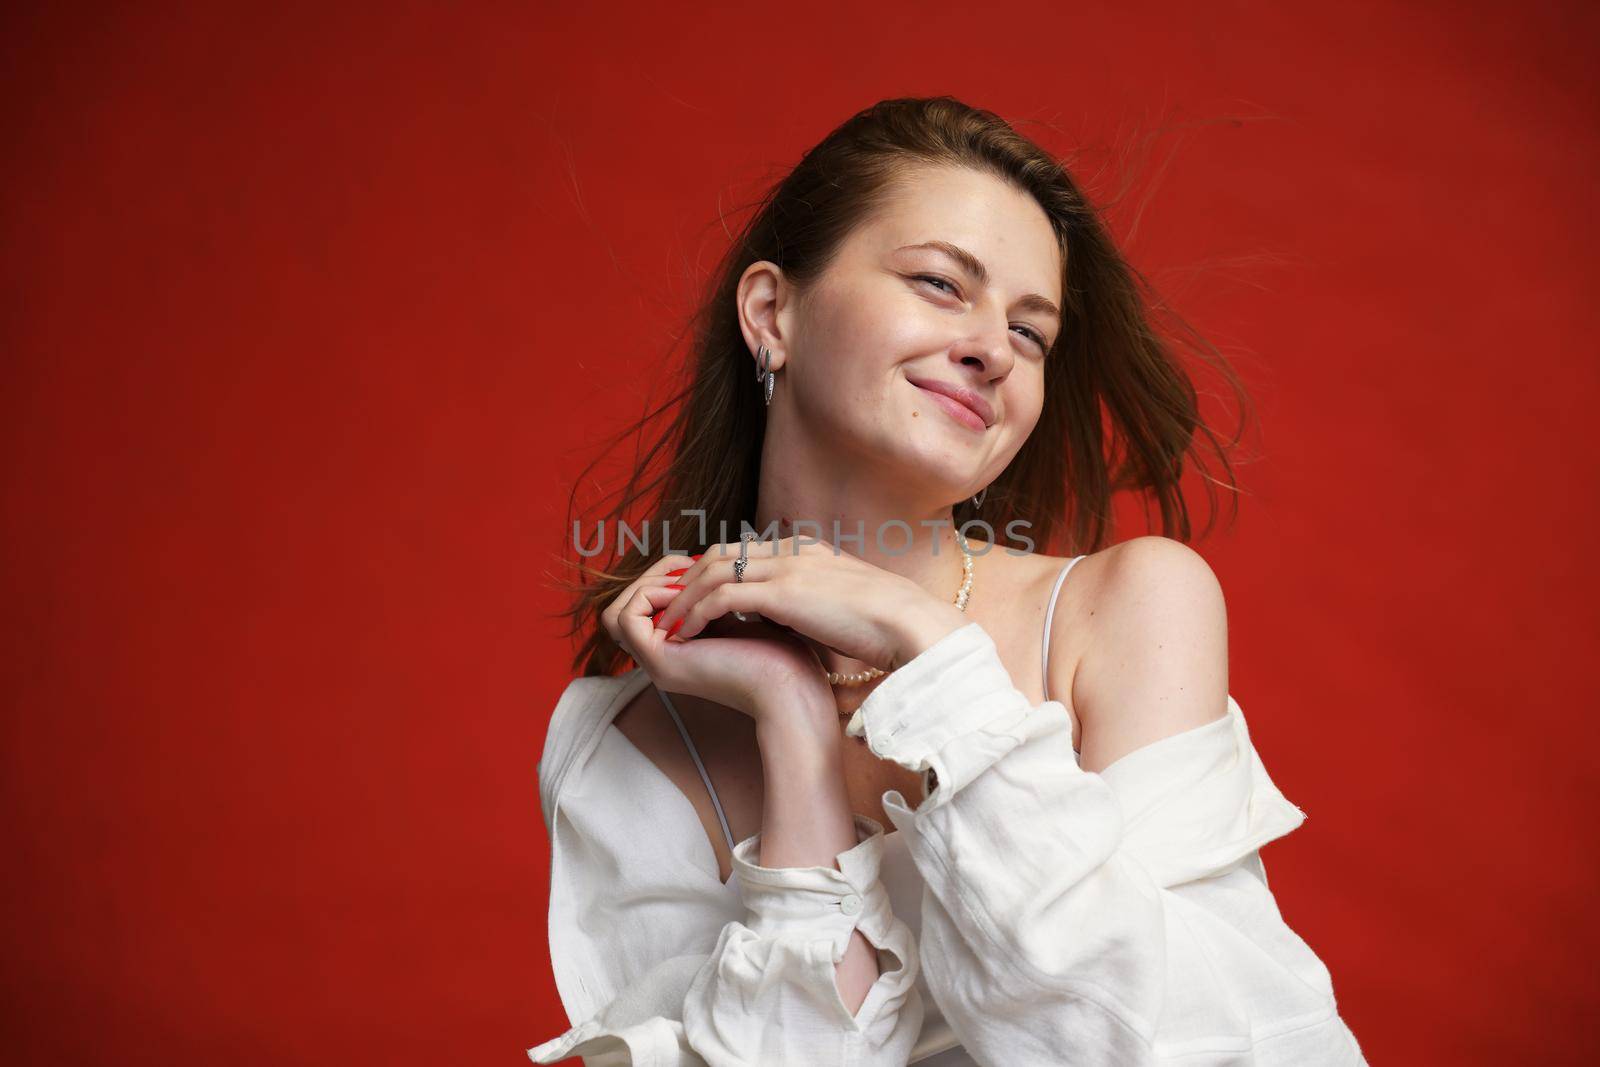 portrait of a cute smiling girl in a white blouse in a studio on a red background